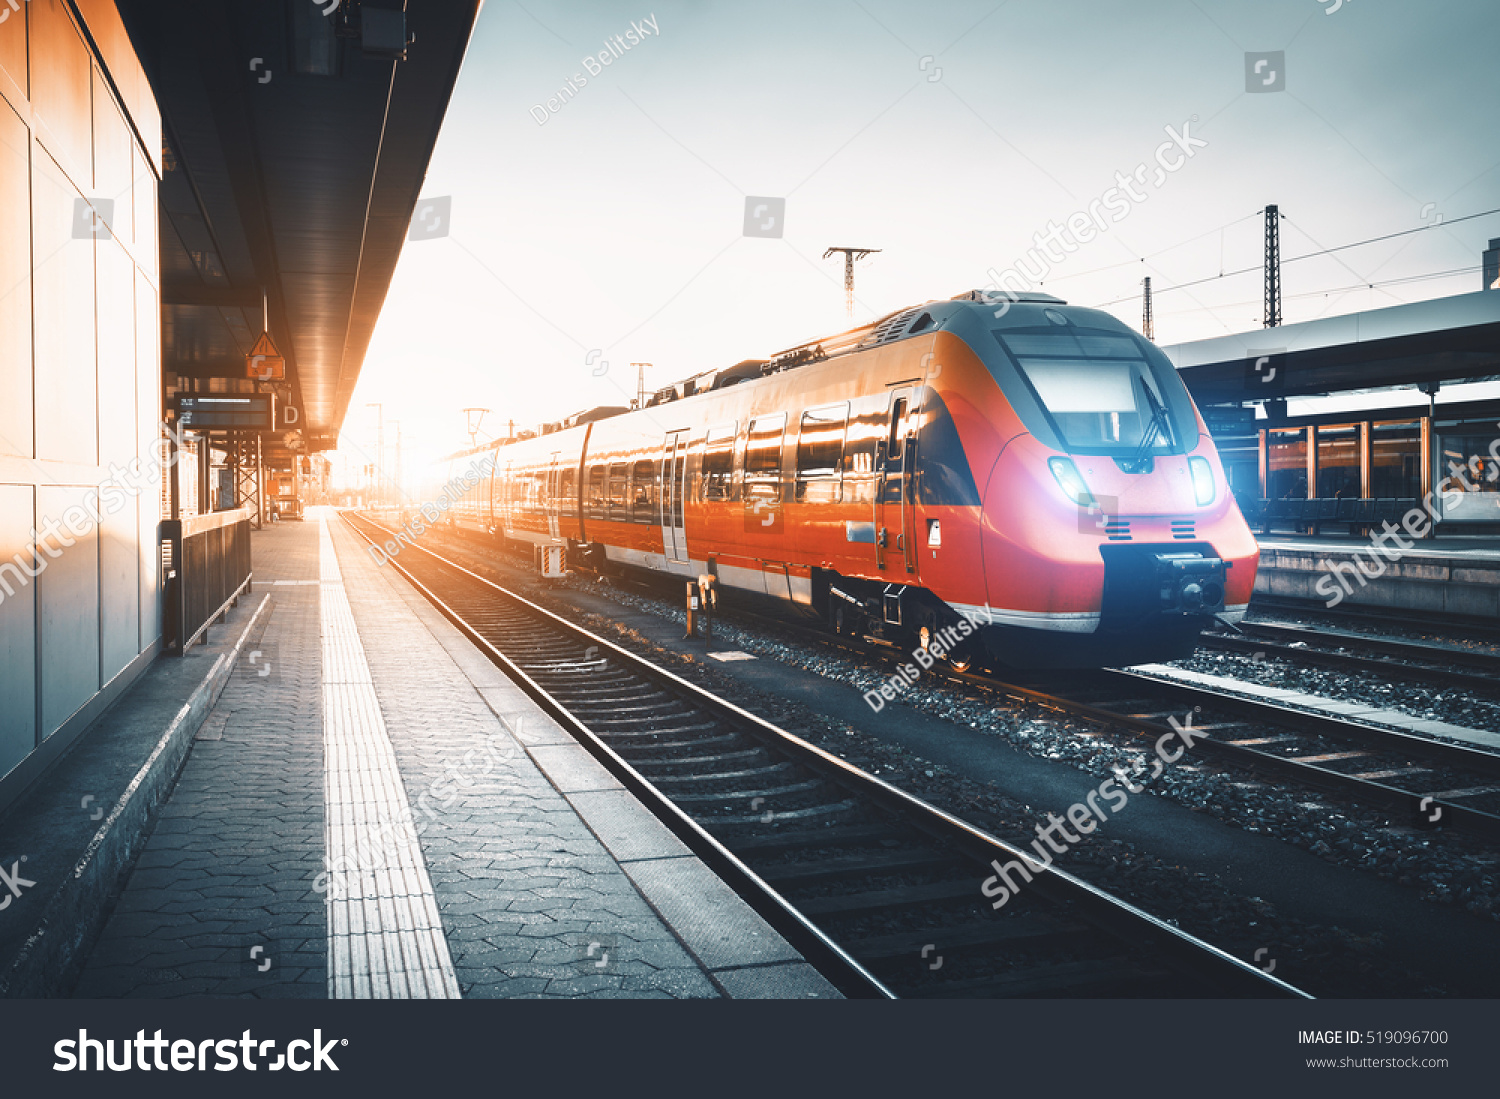 Modern high speed red commuter train at the railway station at sunset. Turning on train headlights. Railroad with vintage toning. Train at railway platform. Industrial landscape. Railway tourism #519096700